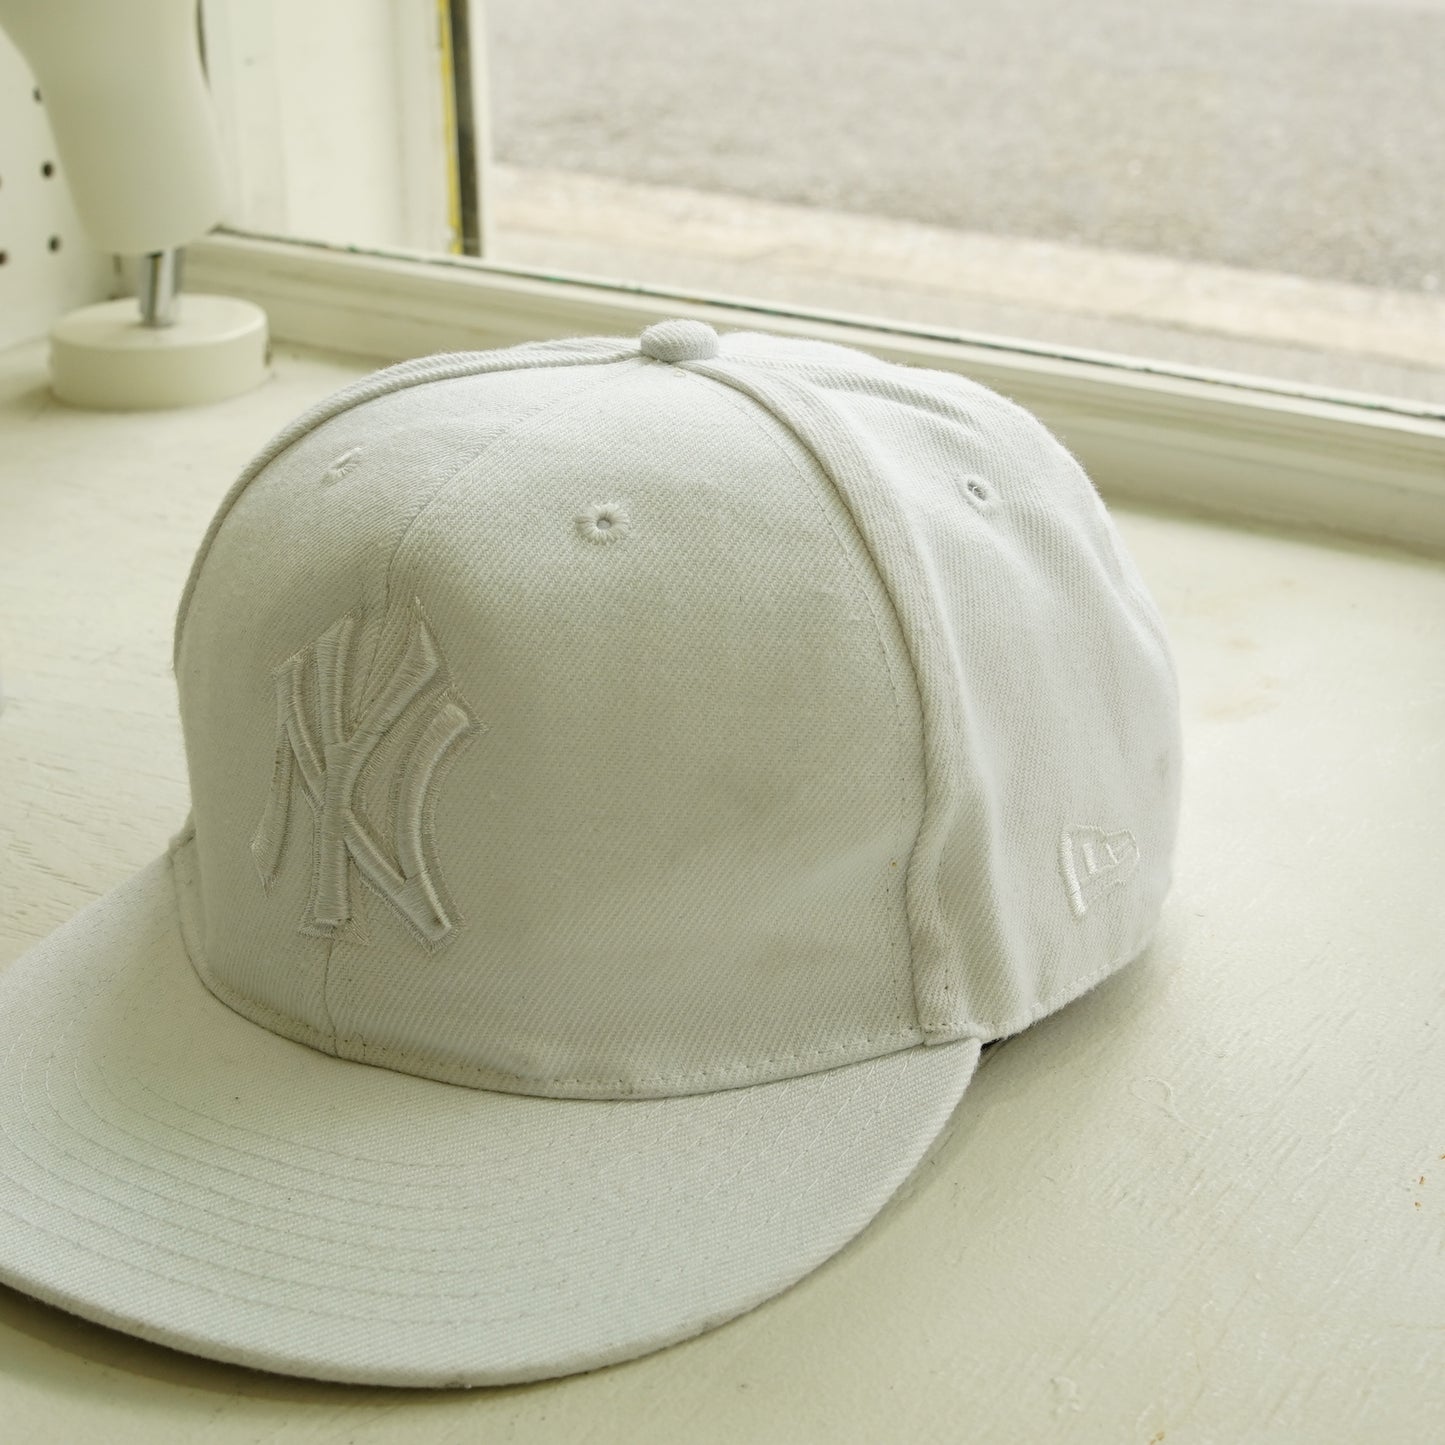 NY Yankees New Era Fitted Hat